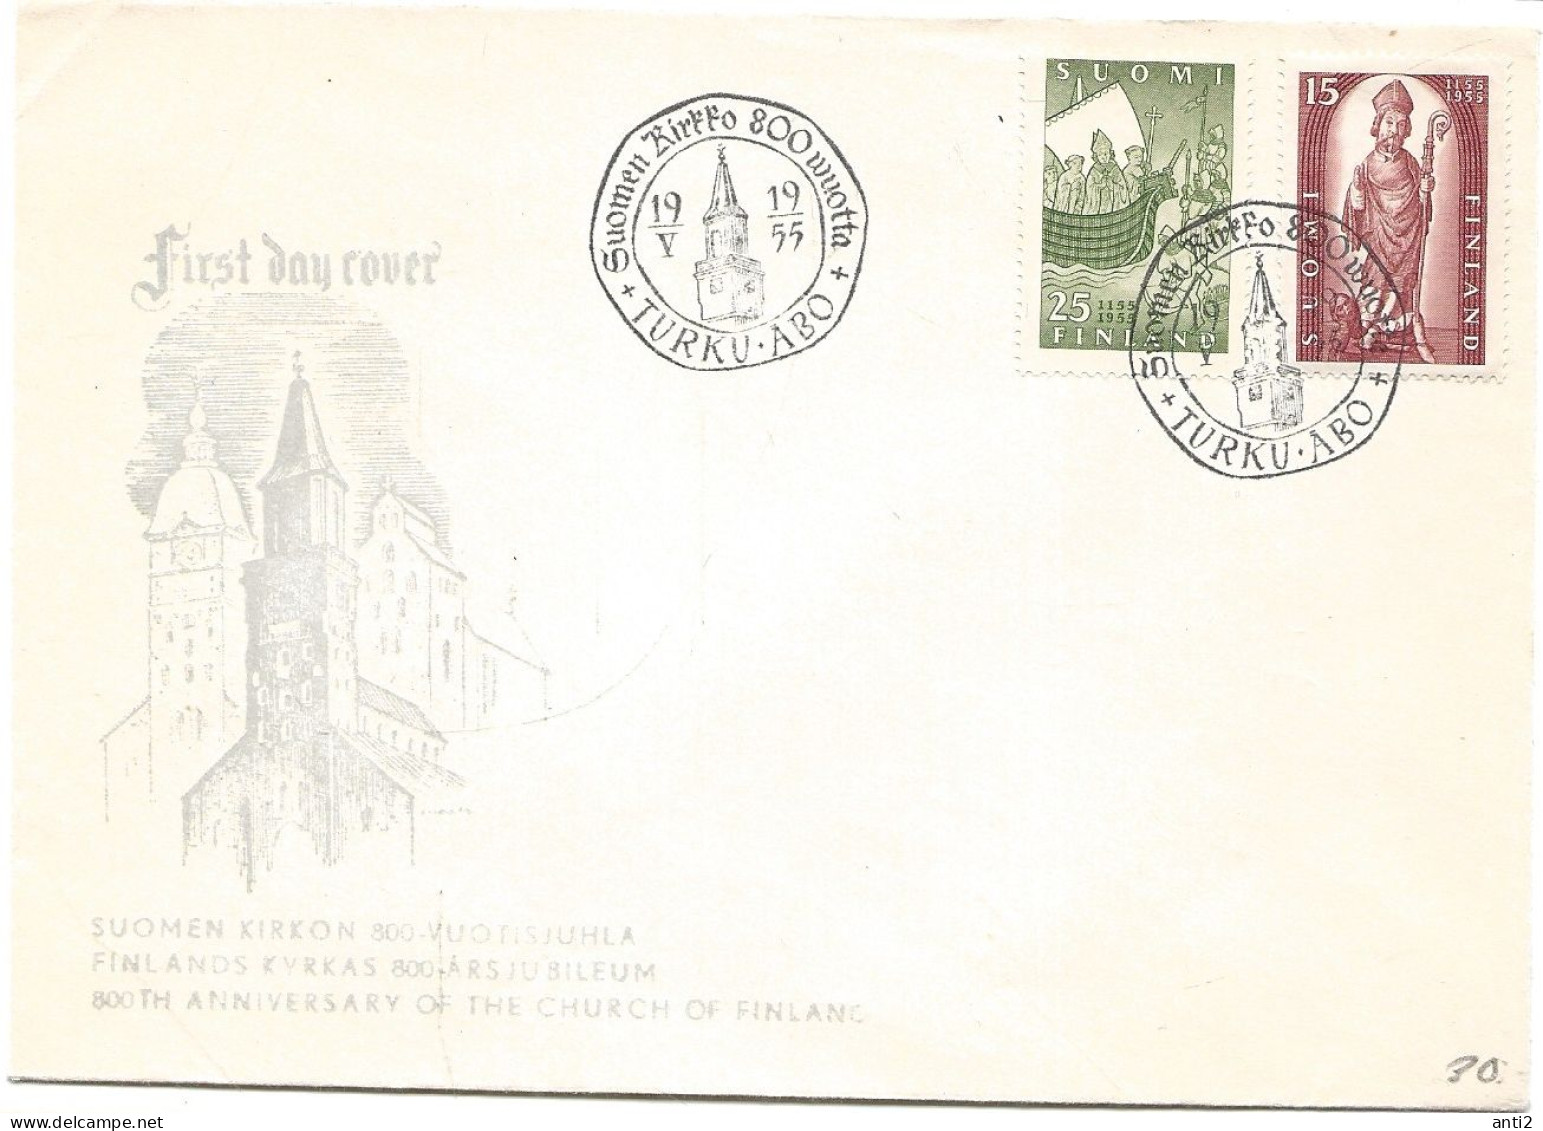 Finland   1955 800th Anniversary Of Christianity In Finland, Bishop Henrik, And Ship  Mi 439-440 FDC - Storia Postale